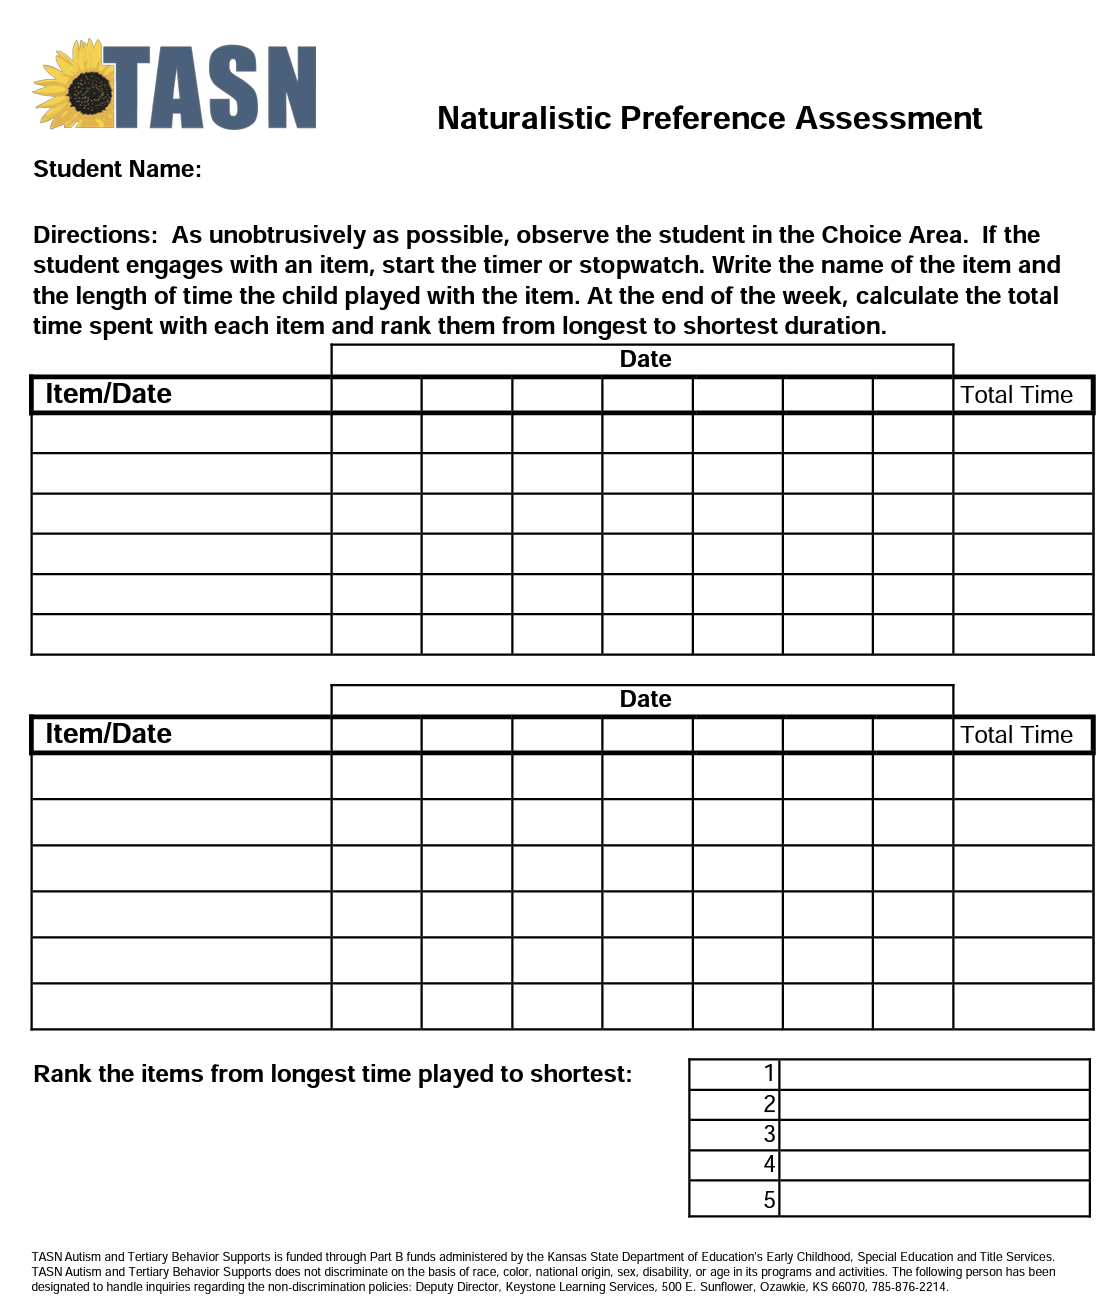 Naturalistic Preference Assessment Form